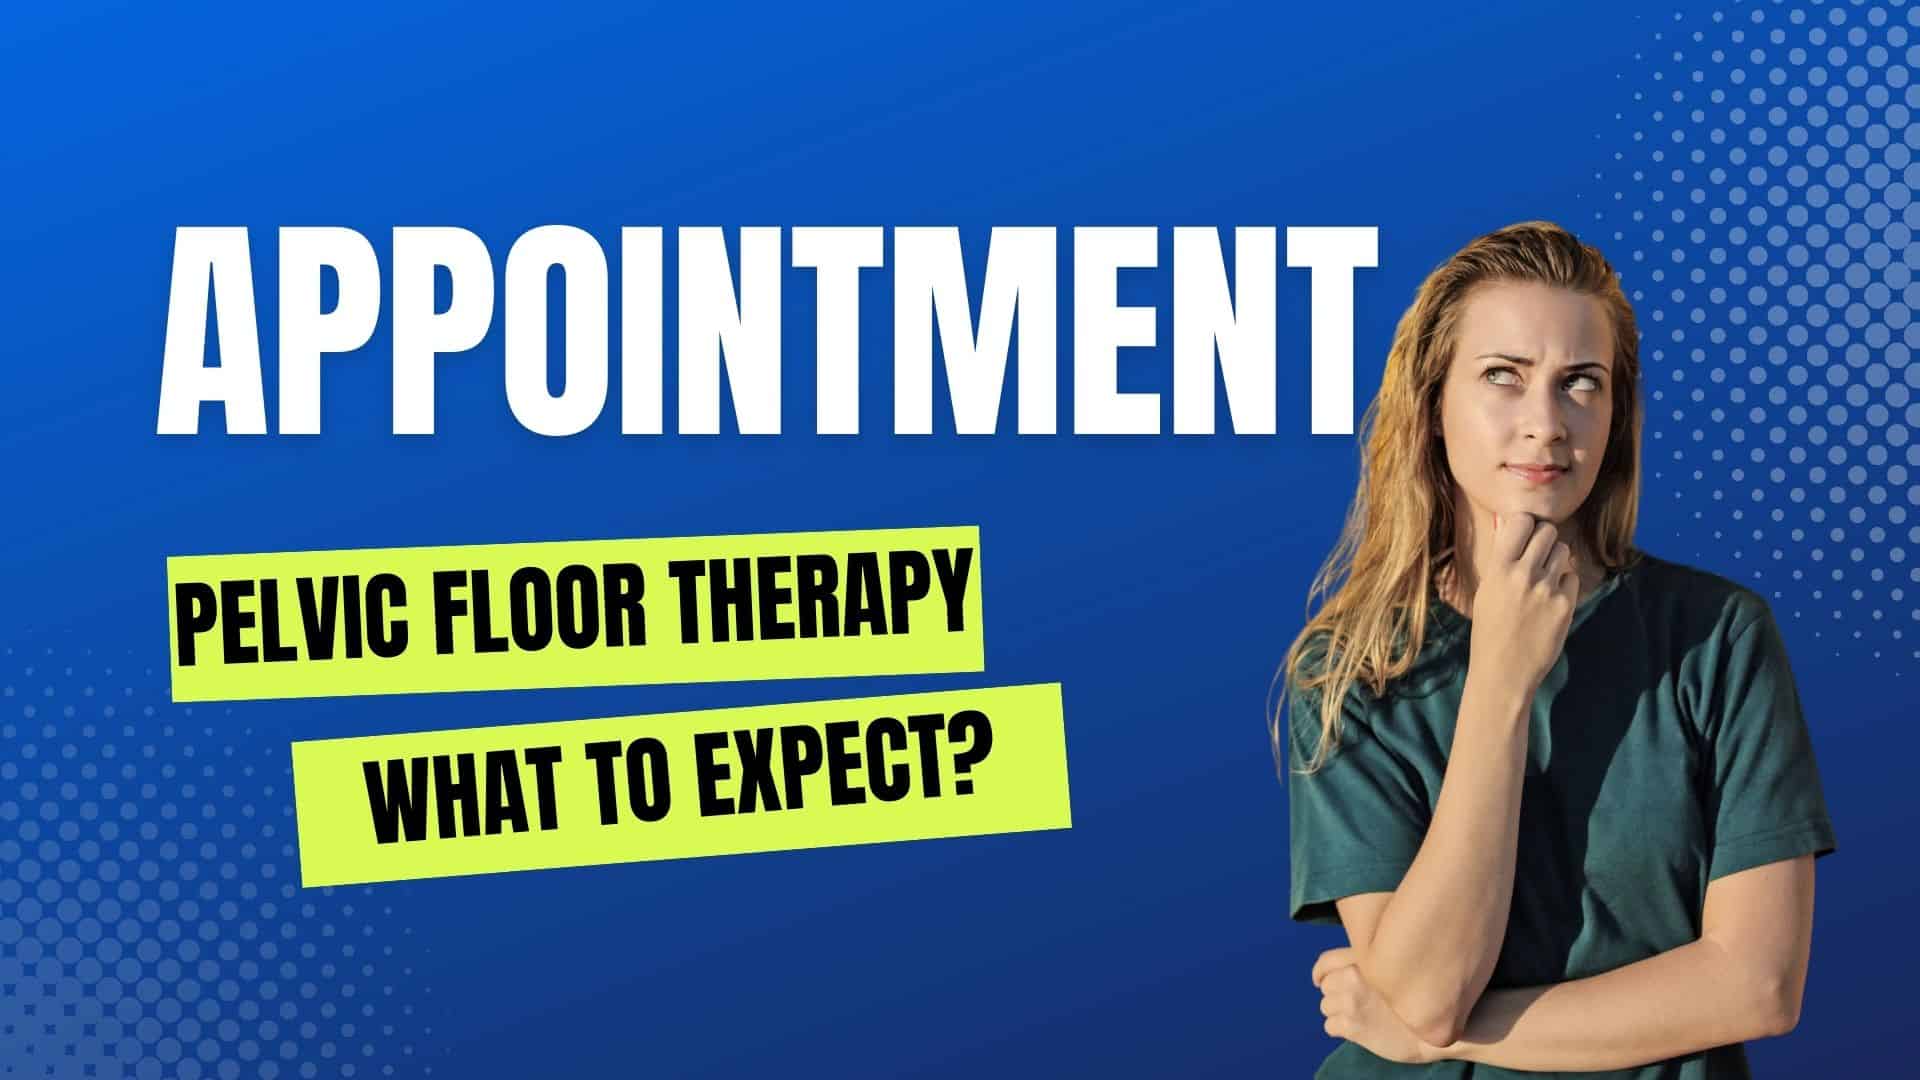 Pelvic Floor Therapy Appointment - What To Expect?